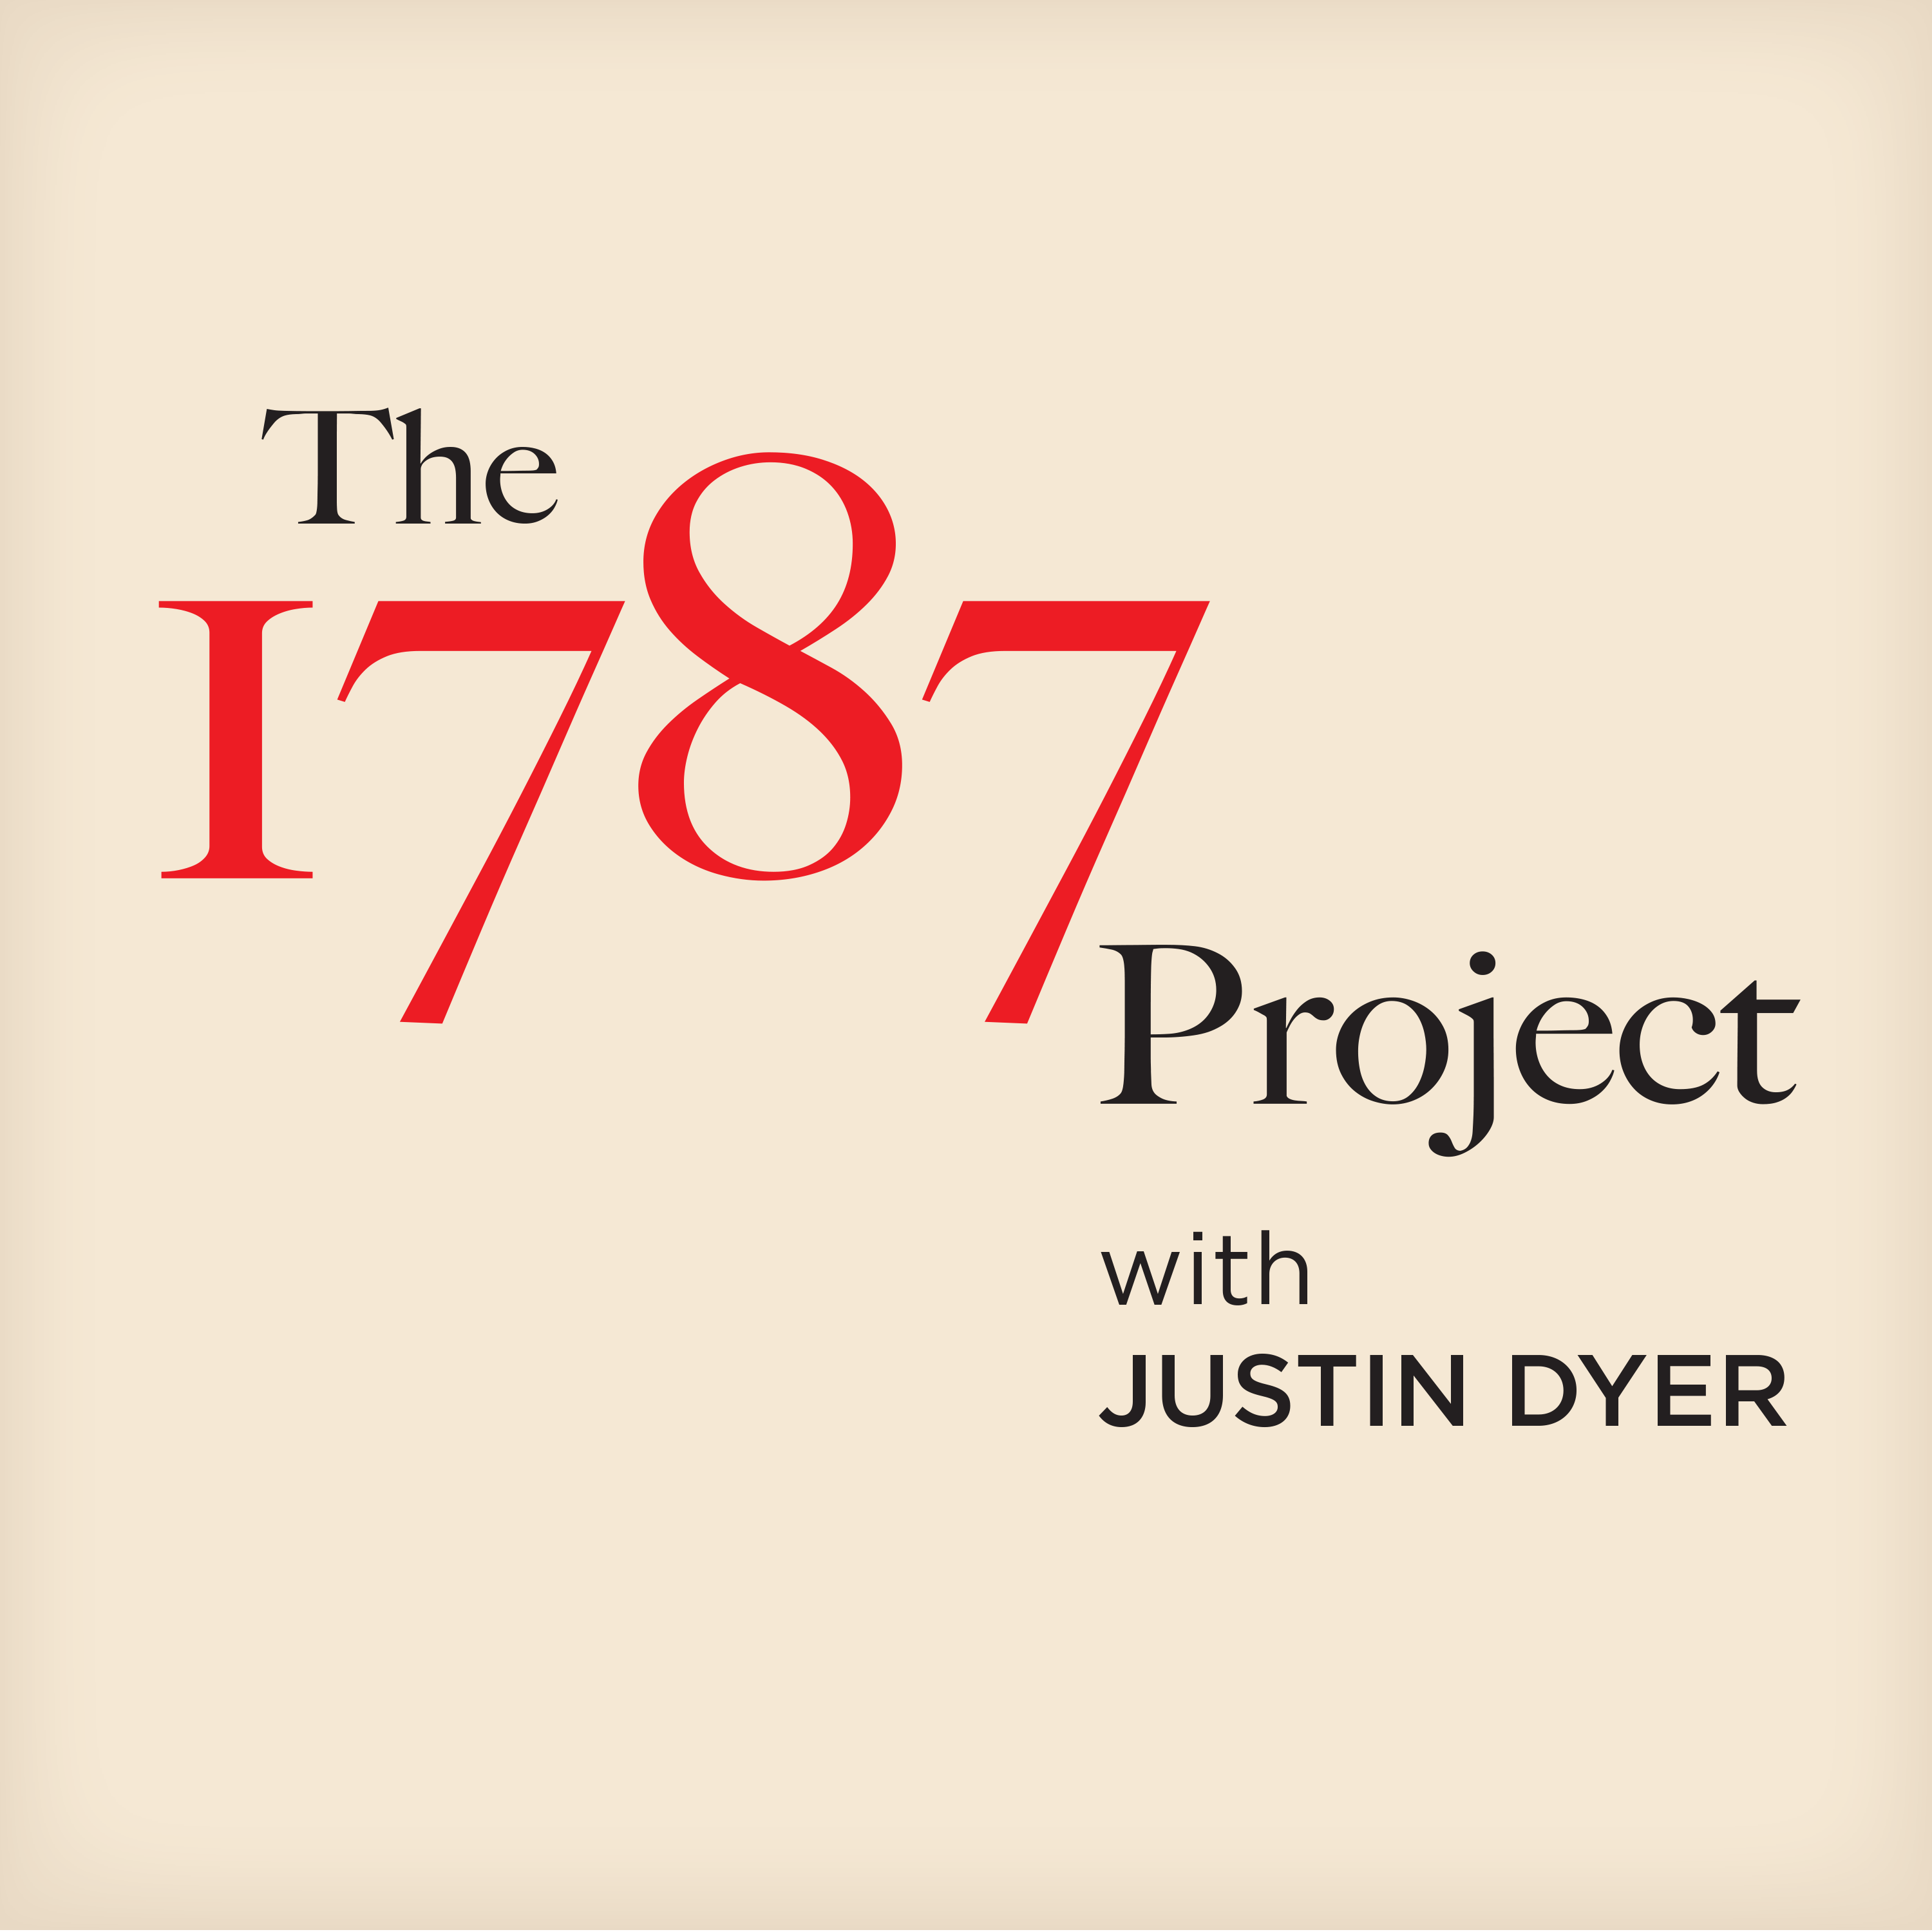 Artwork for The 1787 Project